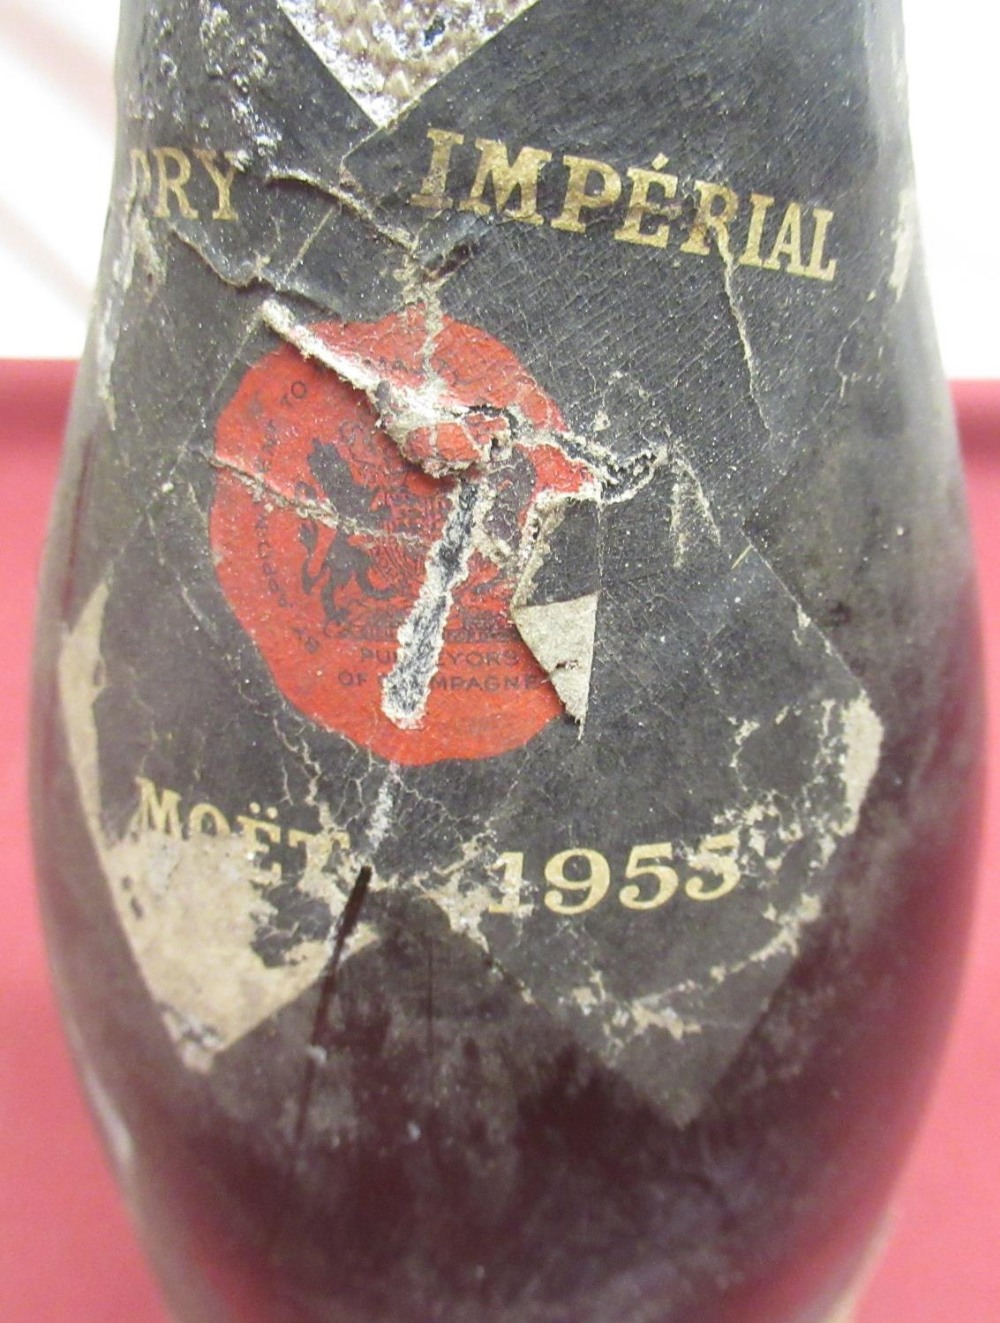 Moet Chandon, Dry Imperial Champagne, 1955, no proof or contents visible, 1btl - Image 3 of 3